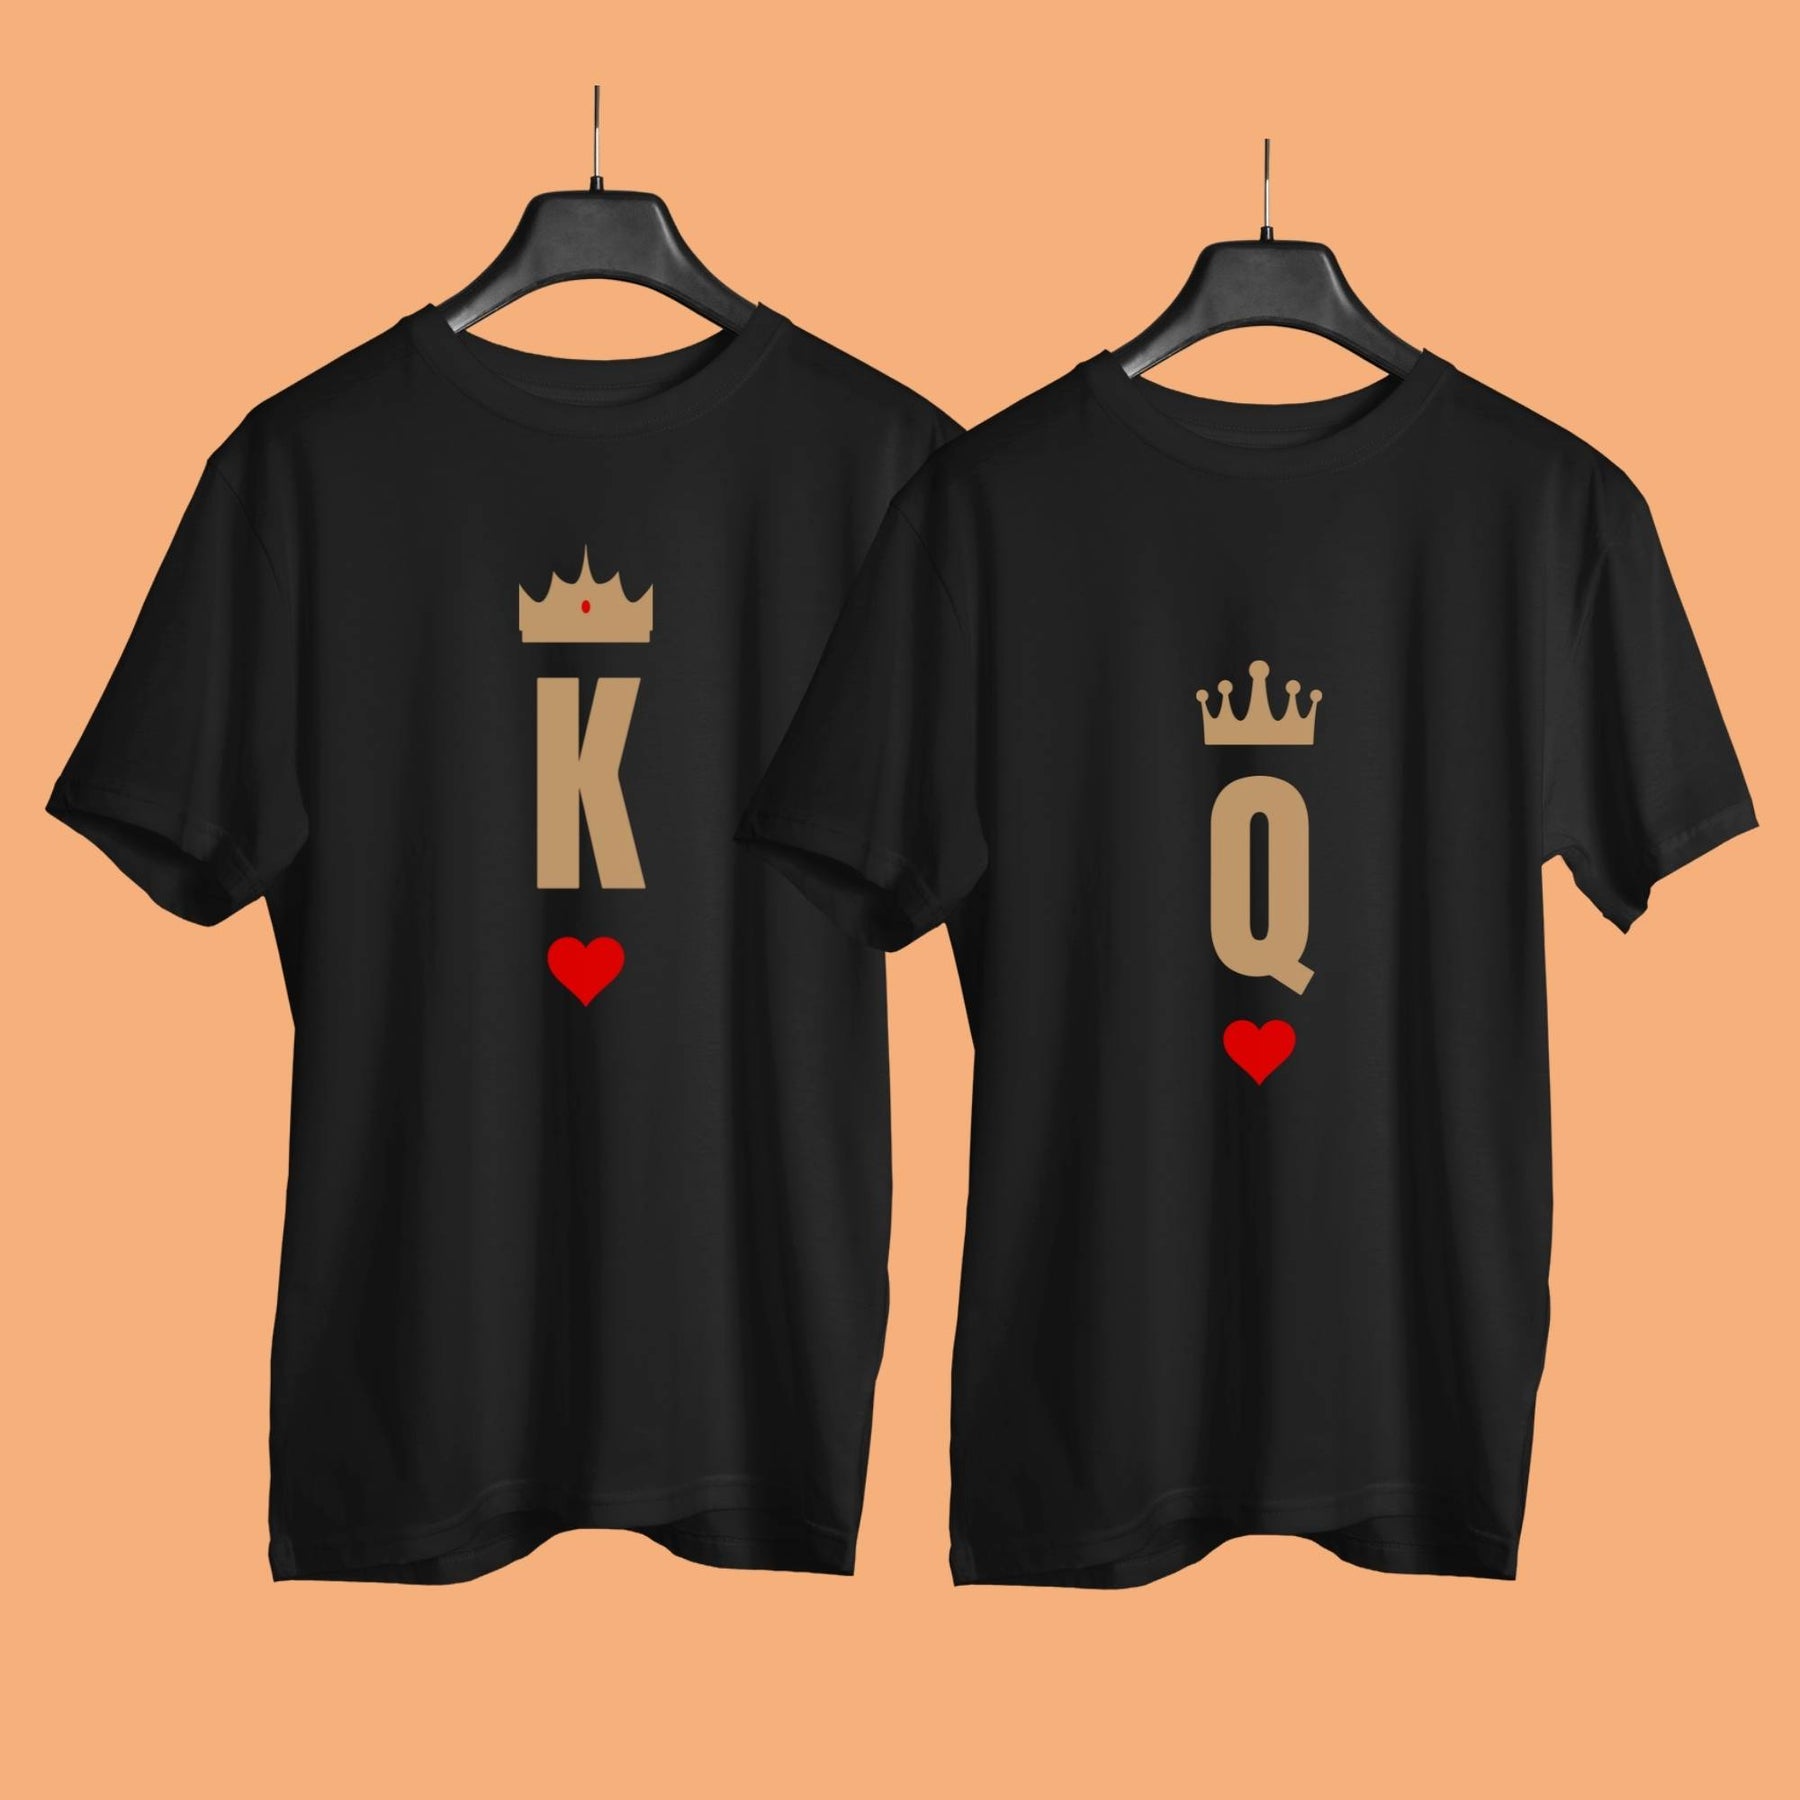 q-for-queen-K-for-king-couple-tshirt-with-front-and-back-print-customizable-black-color-premium-quality-gogirgit-front-shot